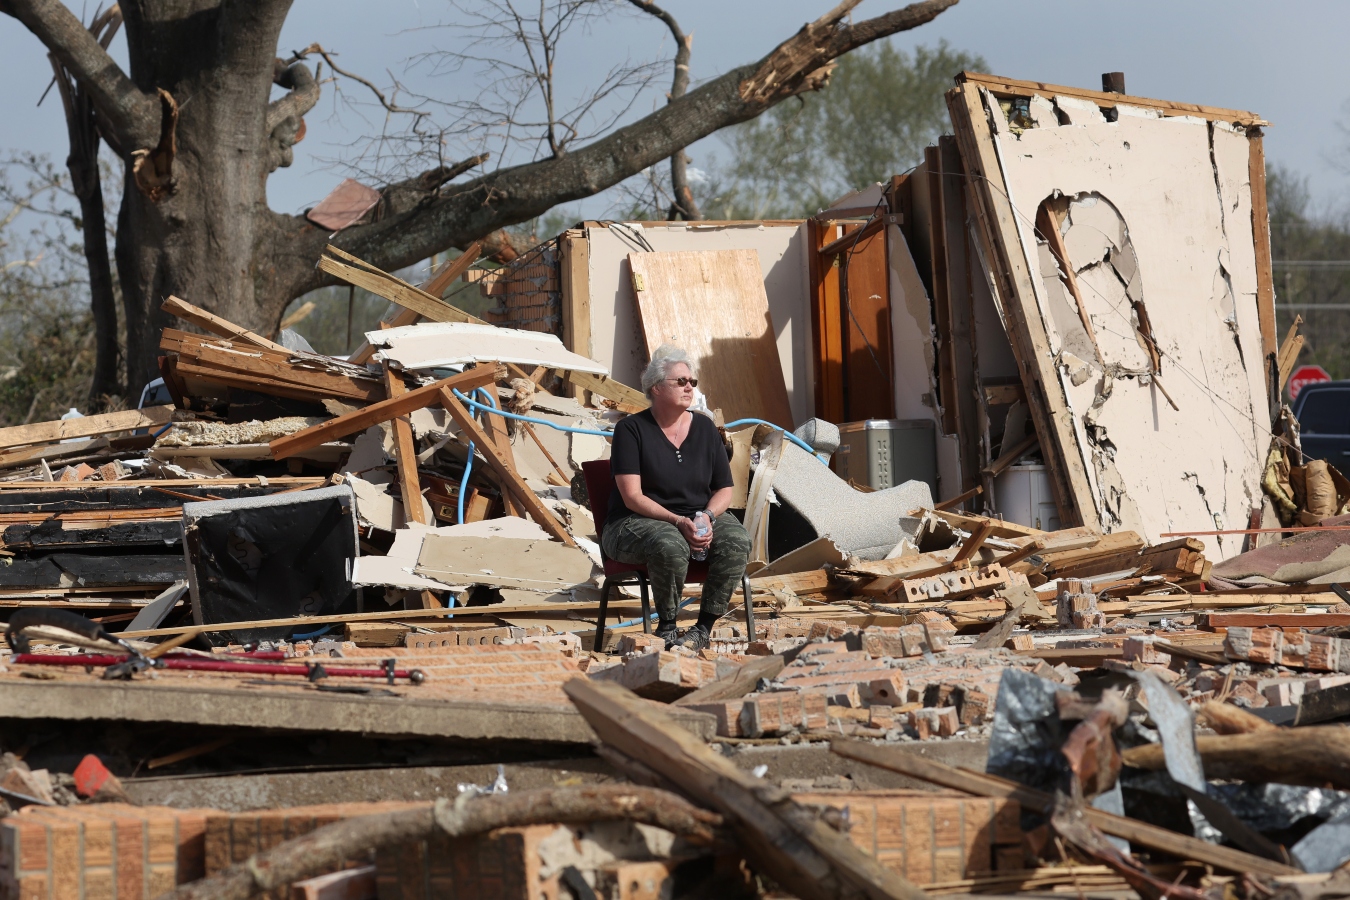 A woman sits on a chair in the middle of a house torn apart by a tornado, a tree with broken branches in the background.